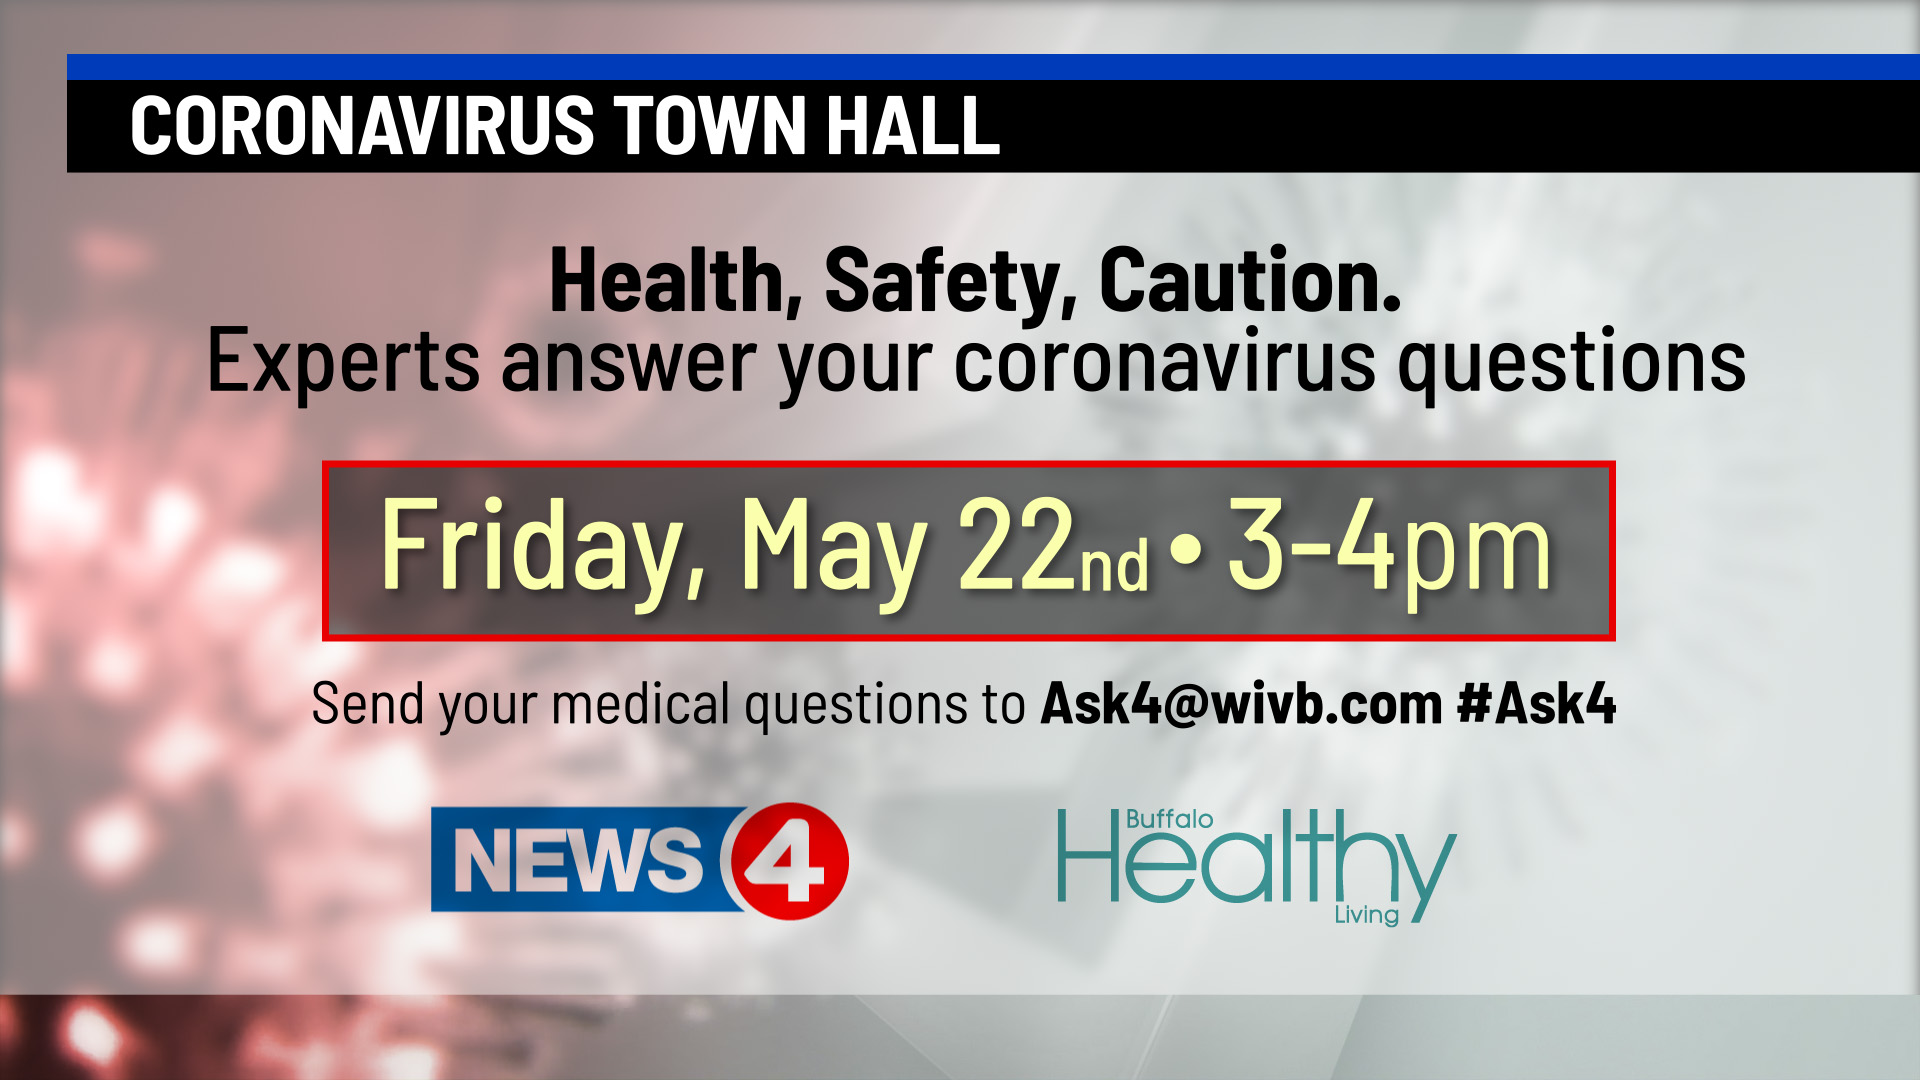 WIVB TV Teams Up with Buffalo Healthy Living To Answer Your Questions